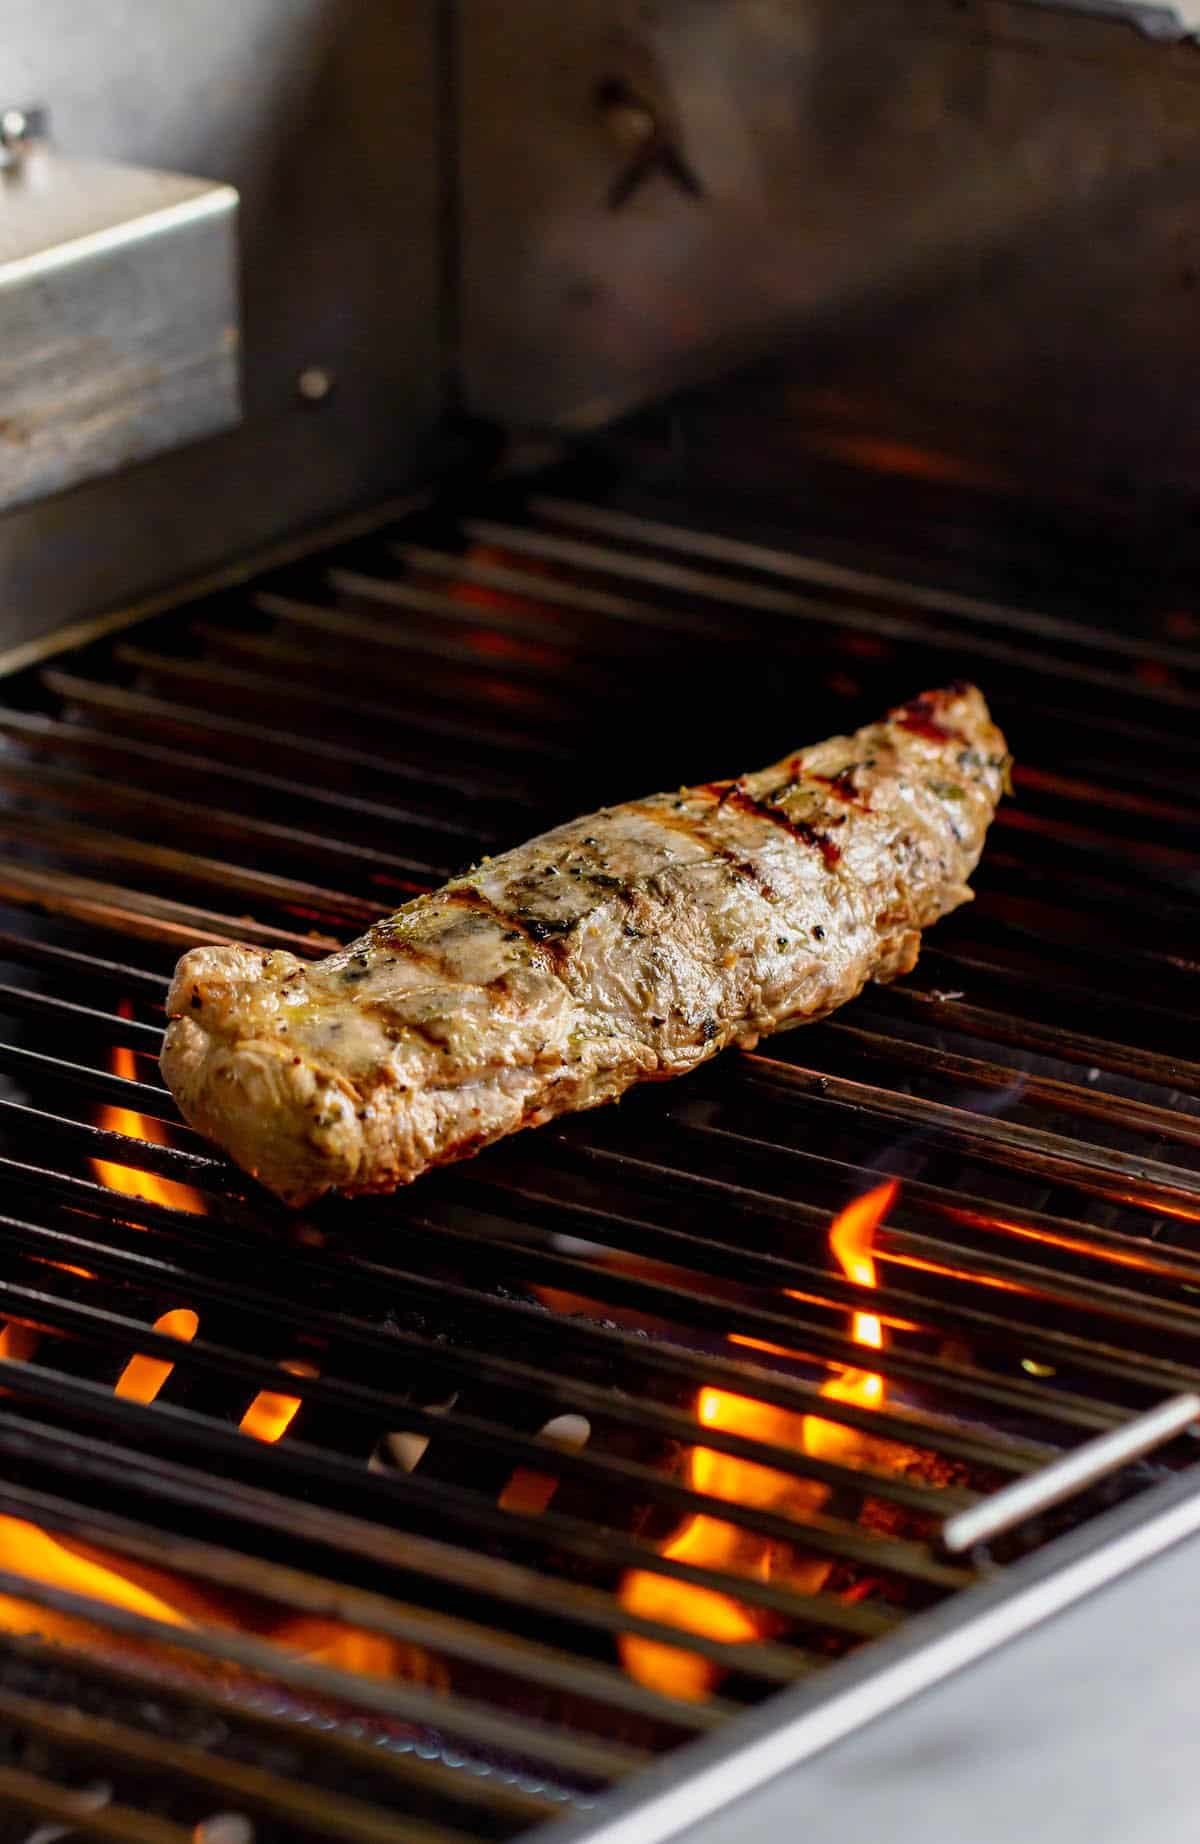 A whole pork tenderloin on a grill. Flames are visible under the grill grates.